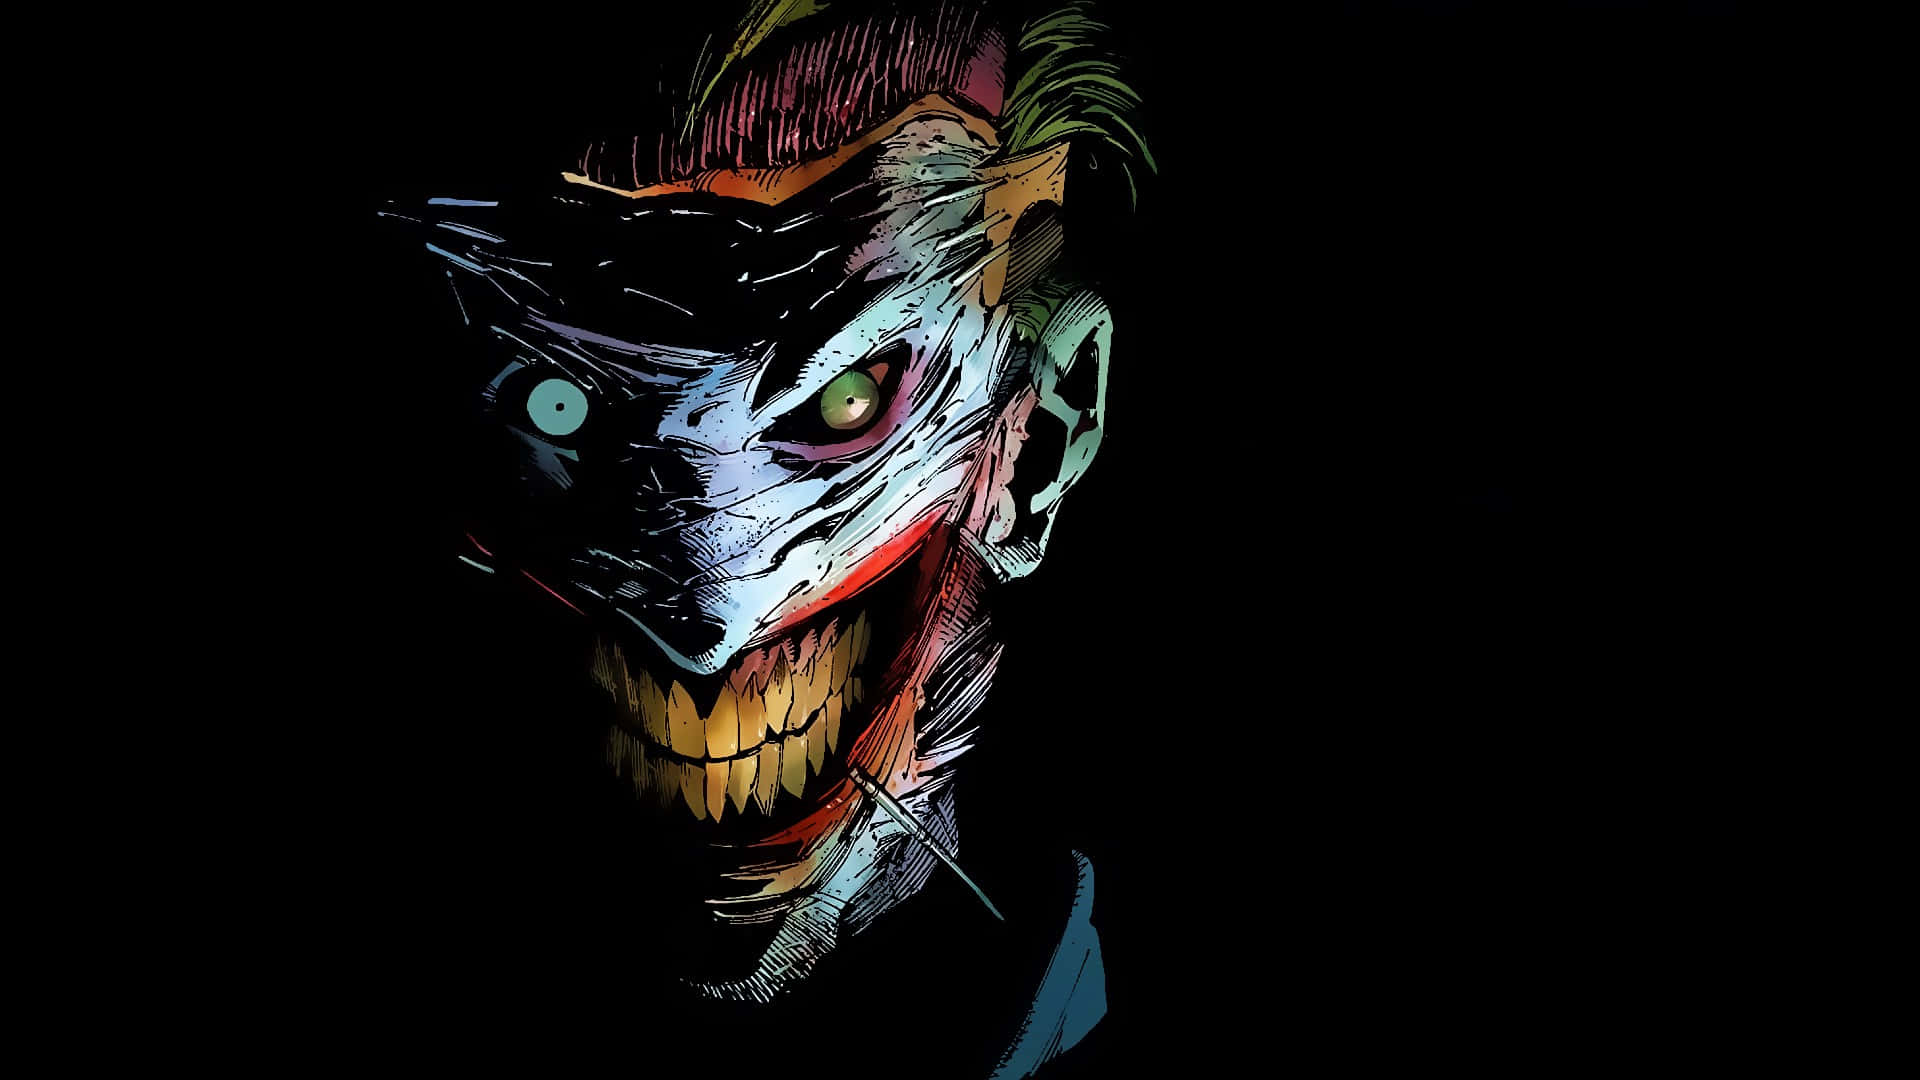 The Joker Comic Eyes And Mouth Open Wallpaper